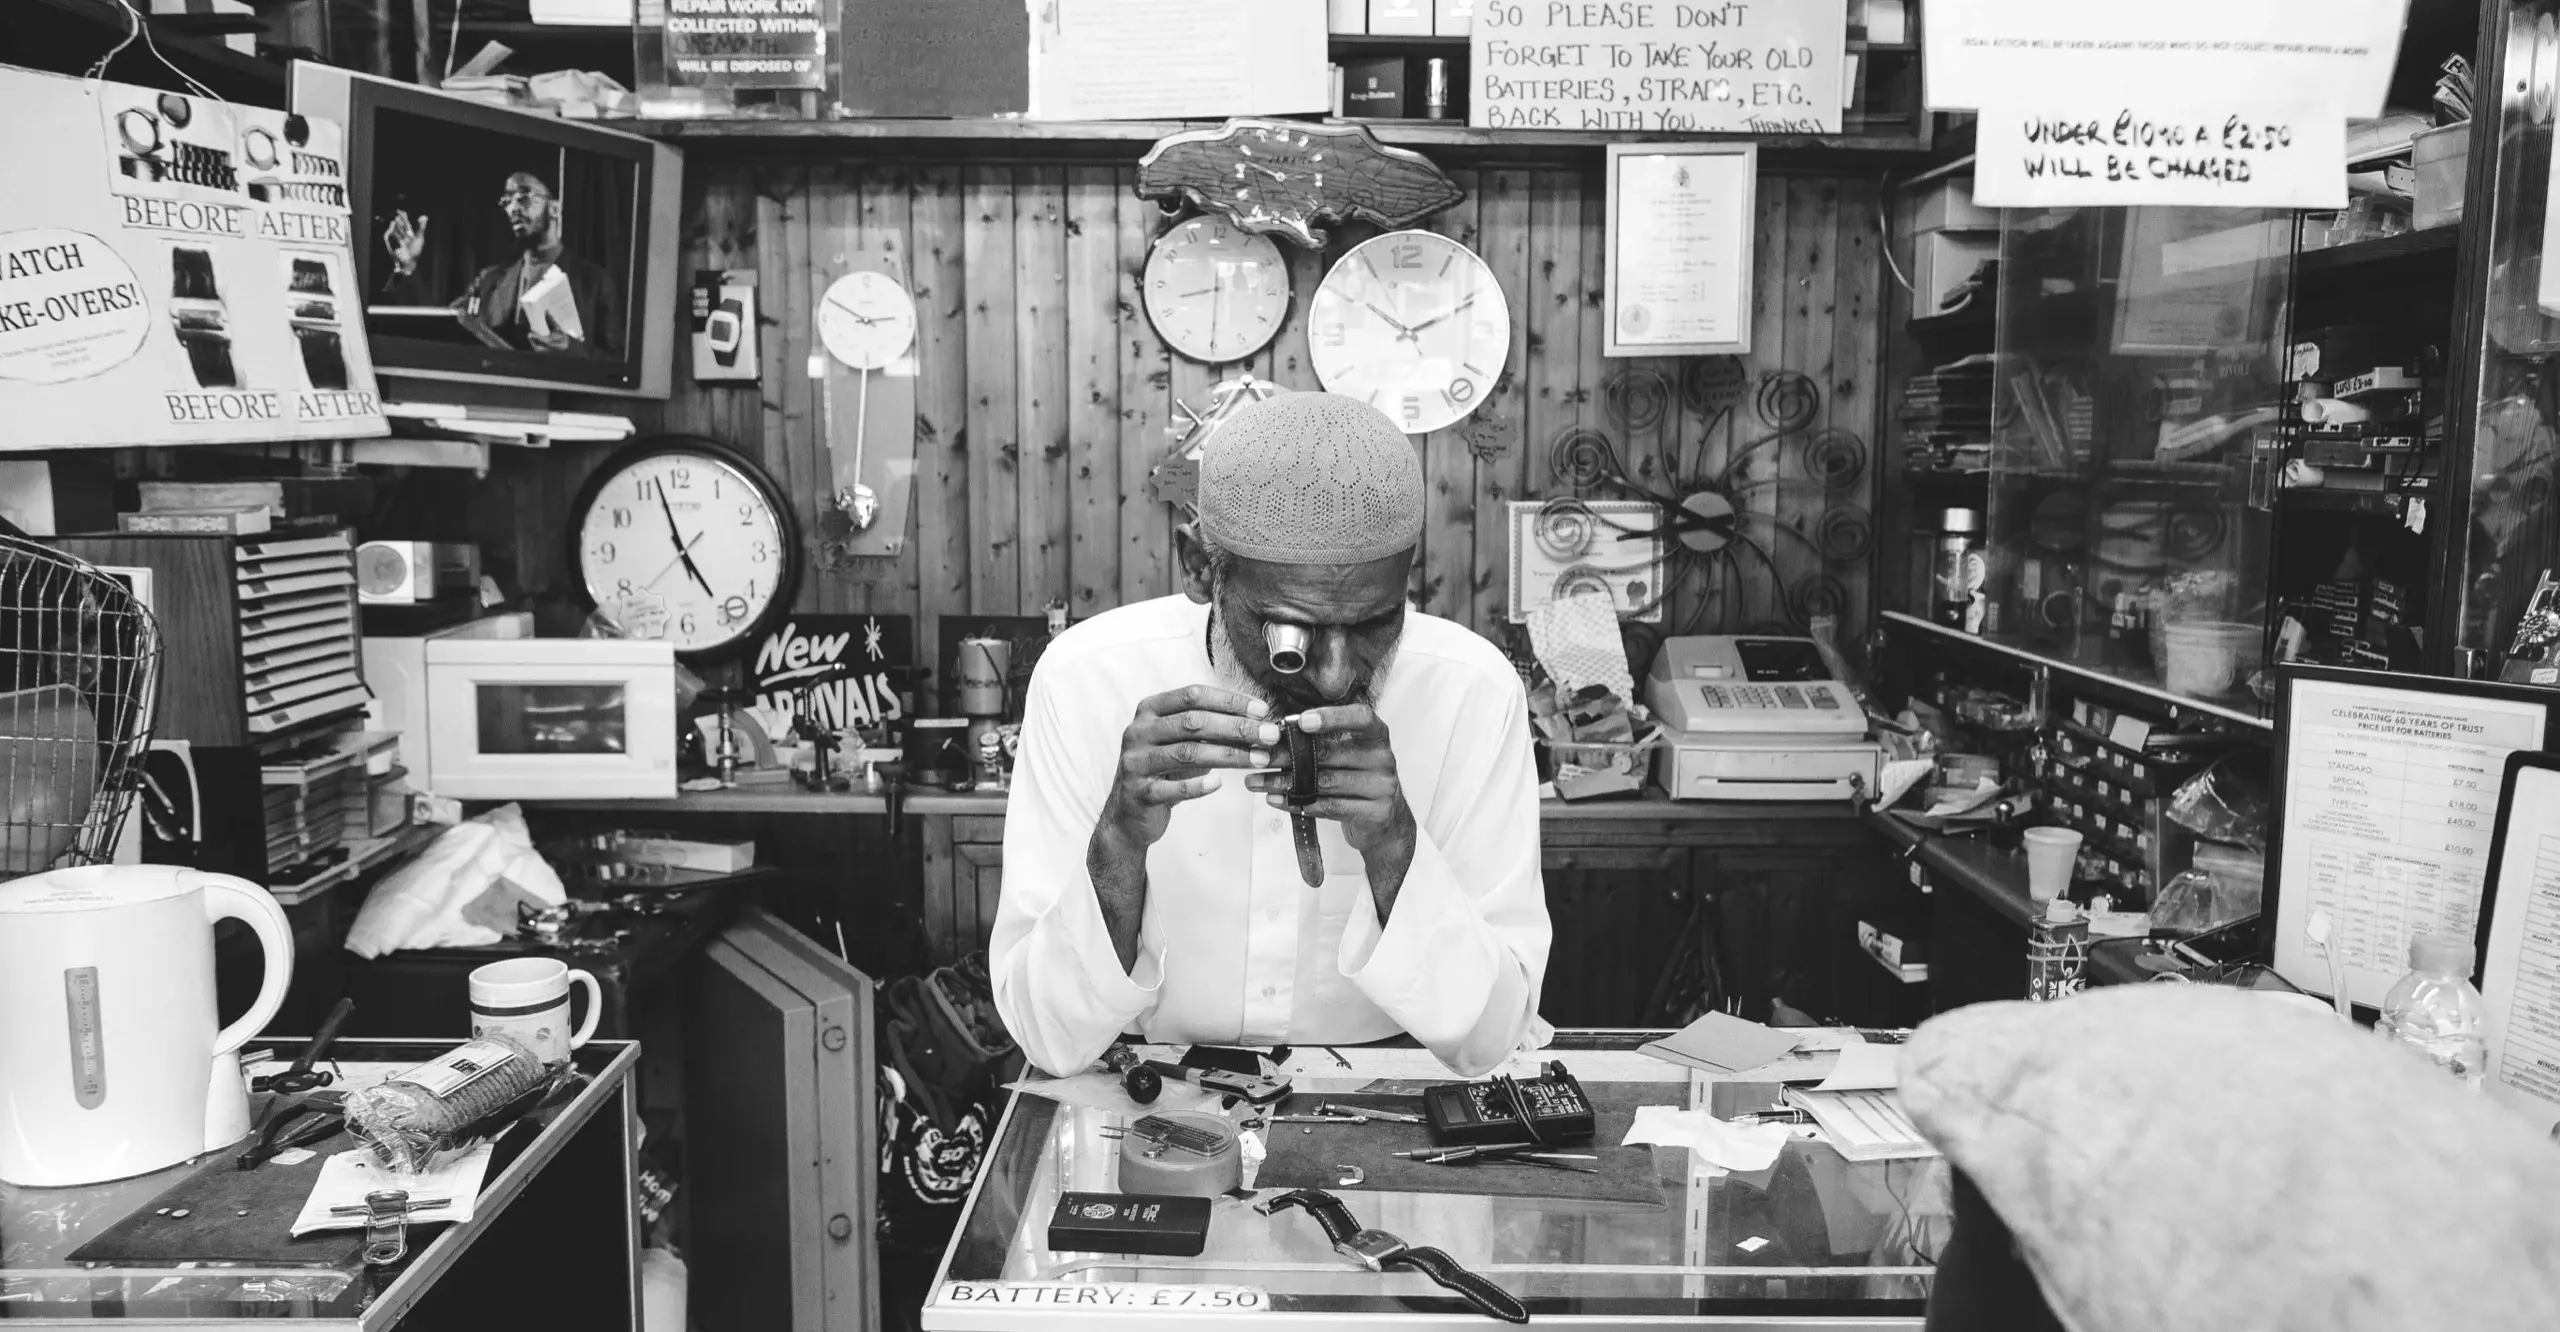 Black and white image featuring a man in a shop leaning on a vitrine surrounded by clocks